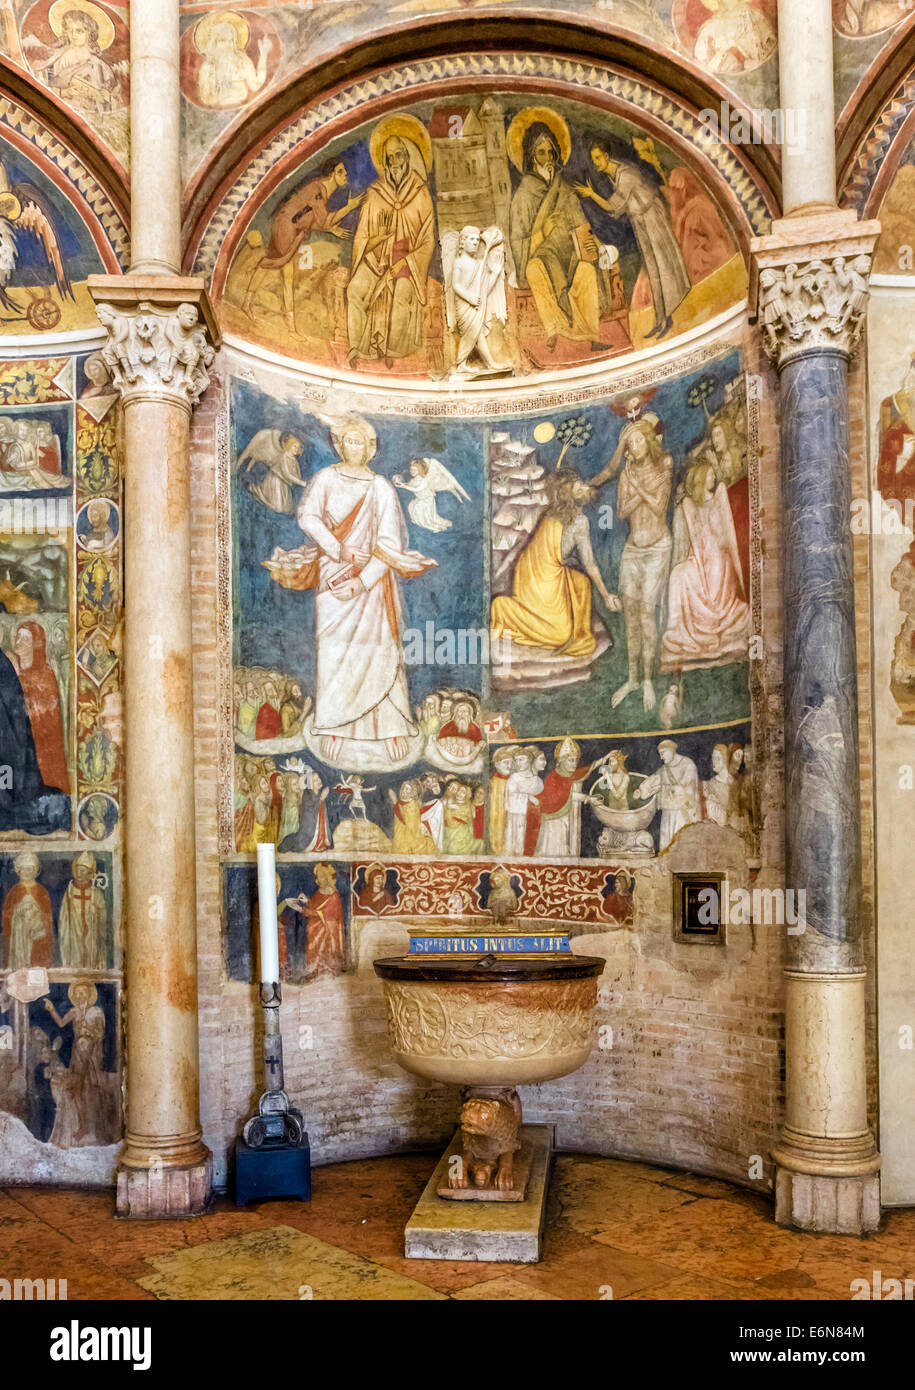 Frescoes in the historic medieval Baptistery, Parma, Emilia Romagna